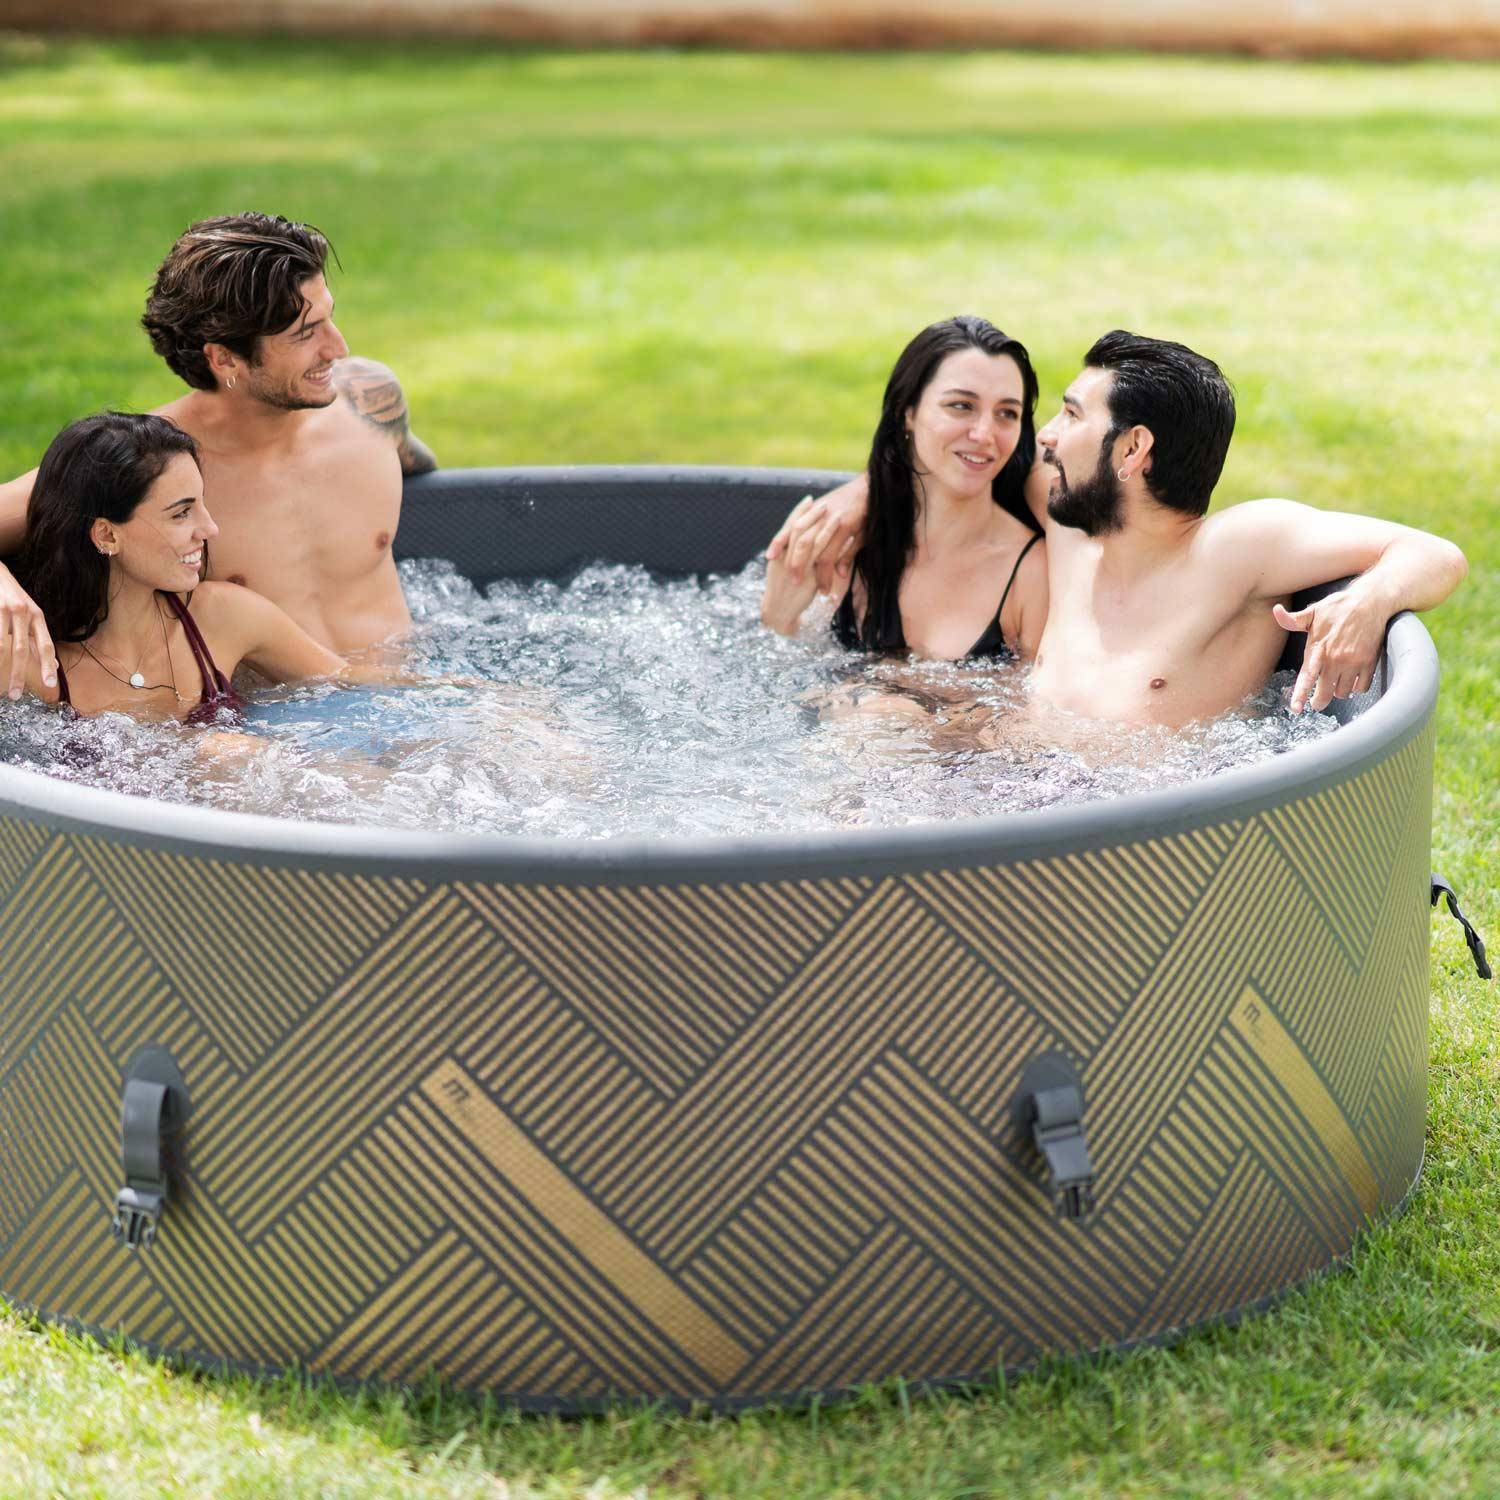  6-person premium round inflatable hot tub MSpa - Ø173cm round 6-person spa, reinforced PVC, pump, heating, filters, cover, floor mat - Mono 6 - Grey,sweeek,Photo2